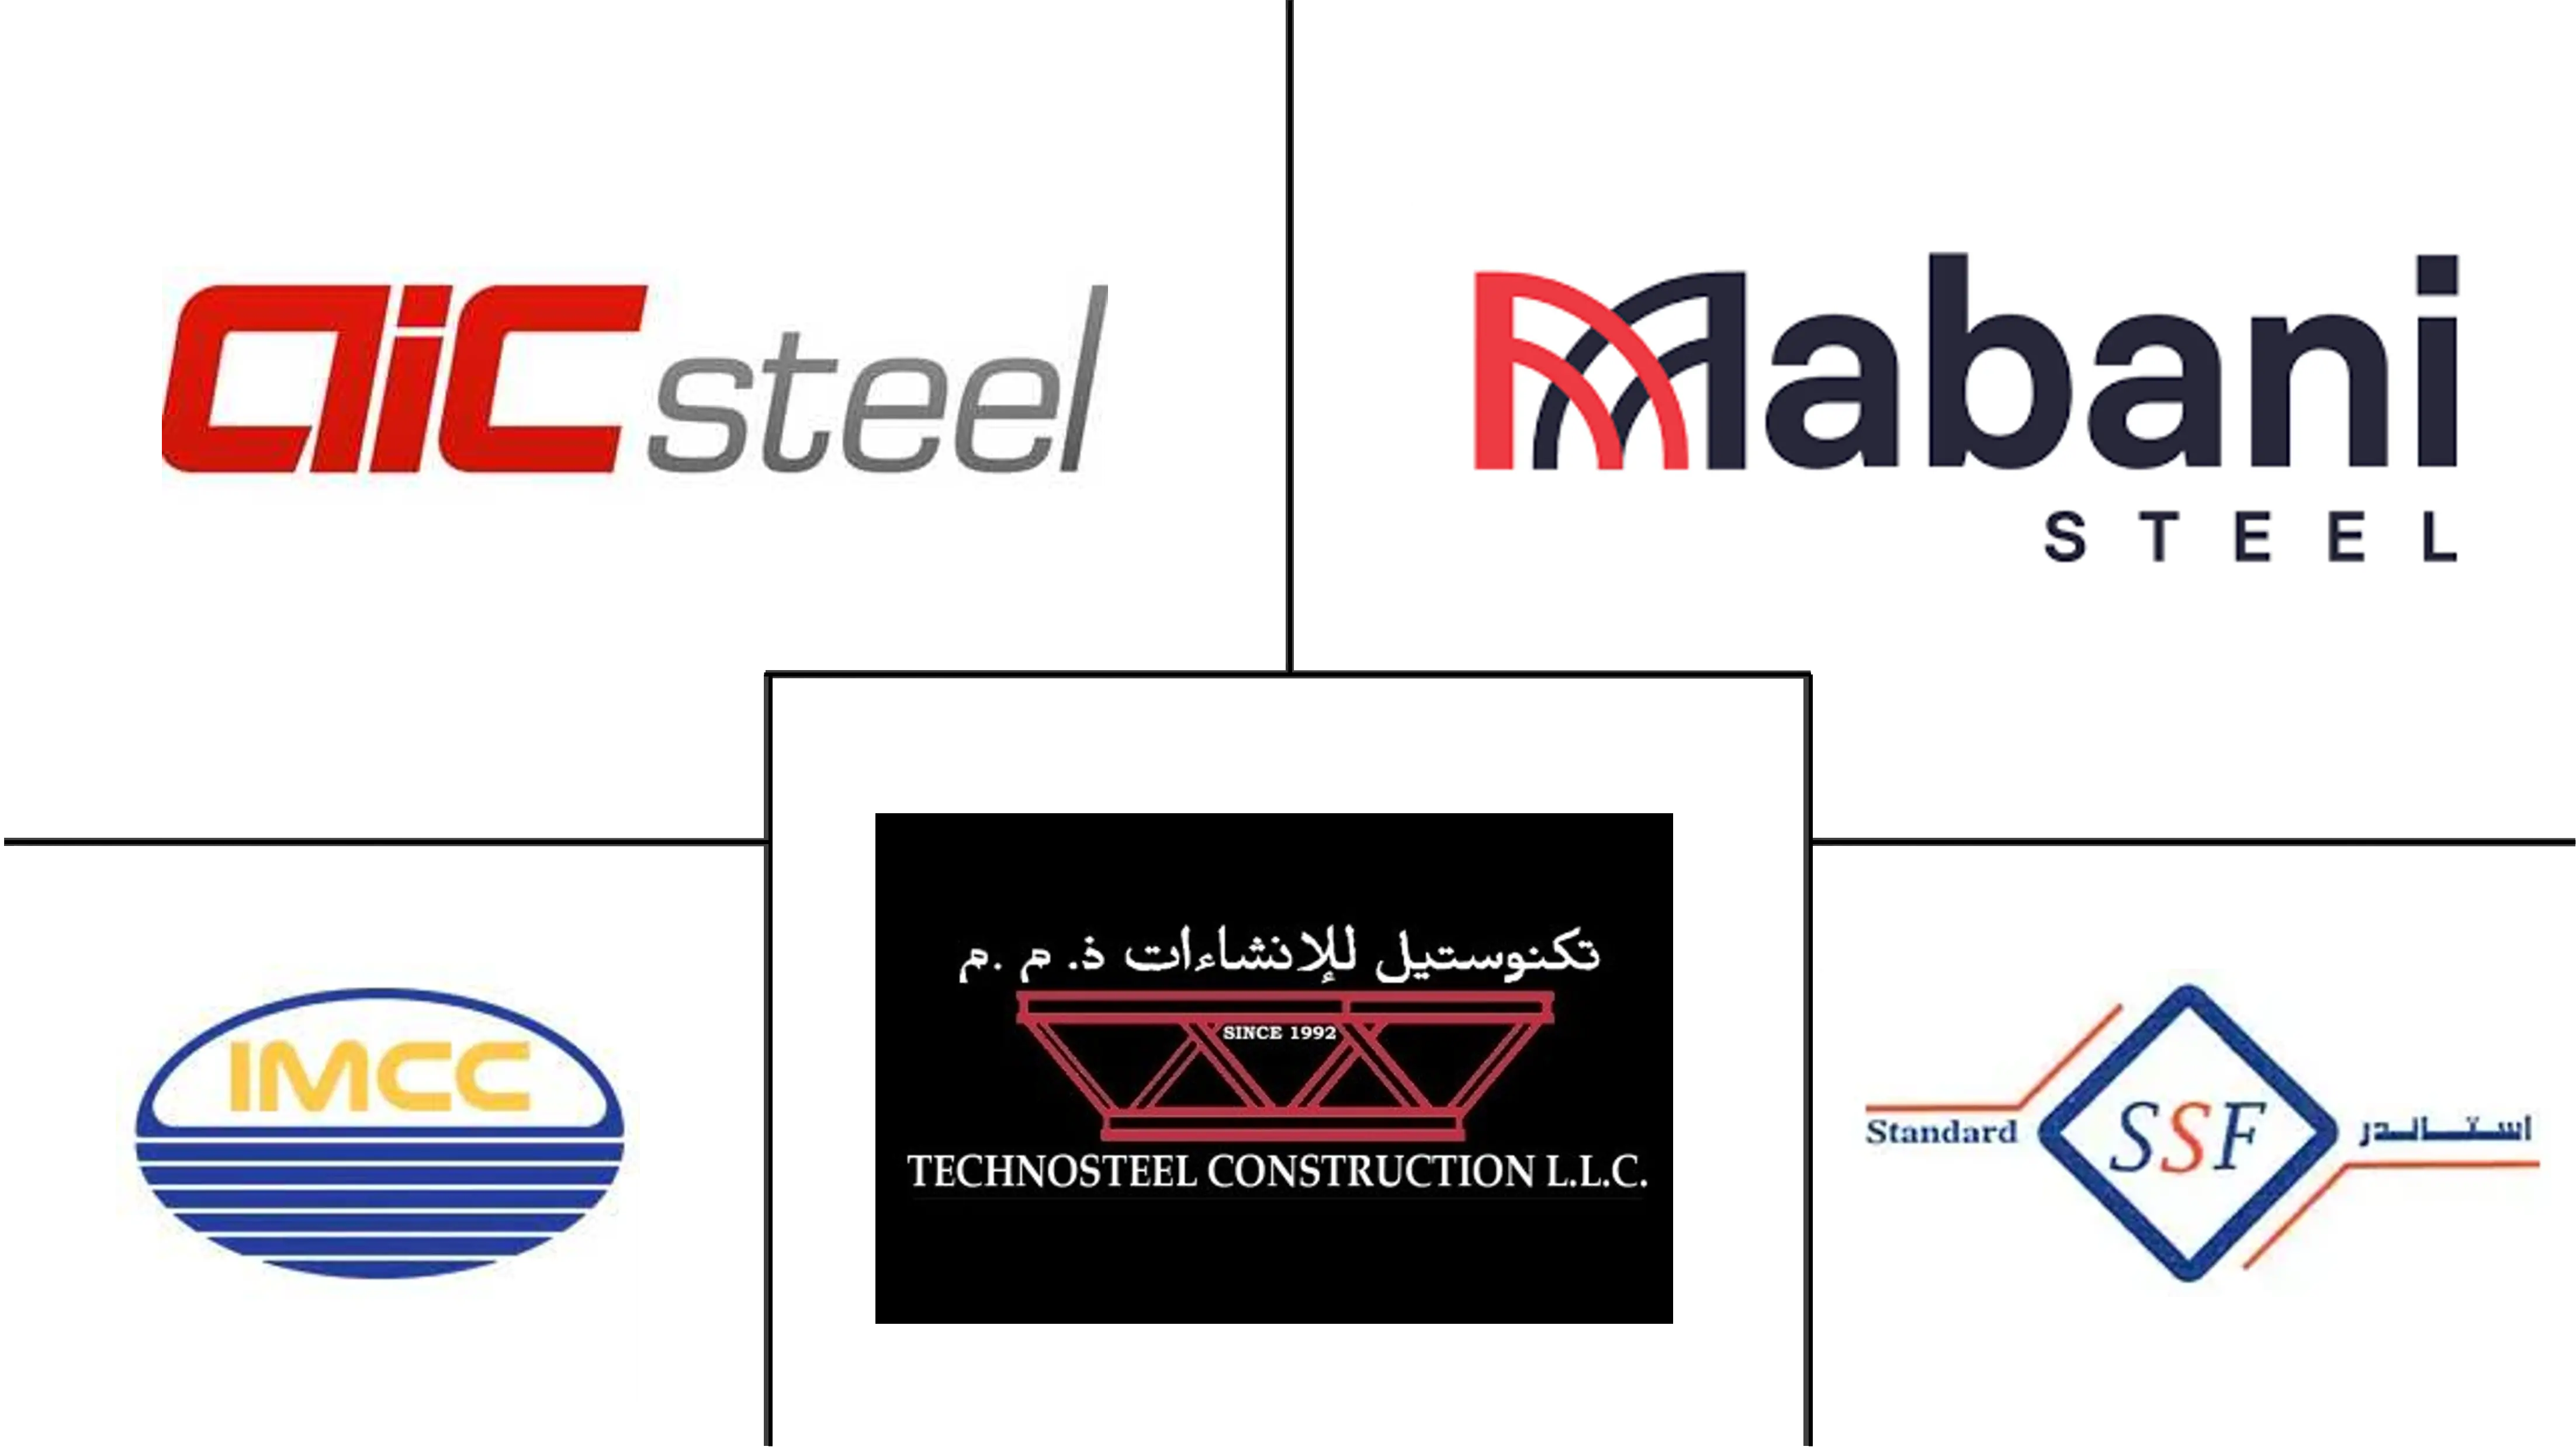 United Arab Emirates Structural Steel Fabrication Market Major Players